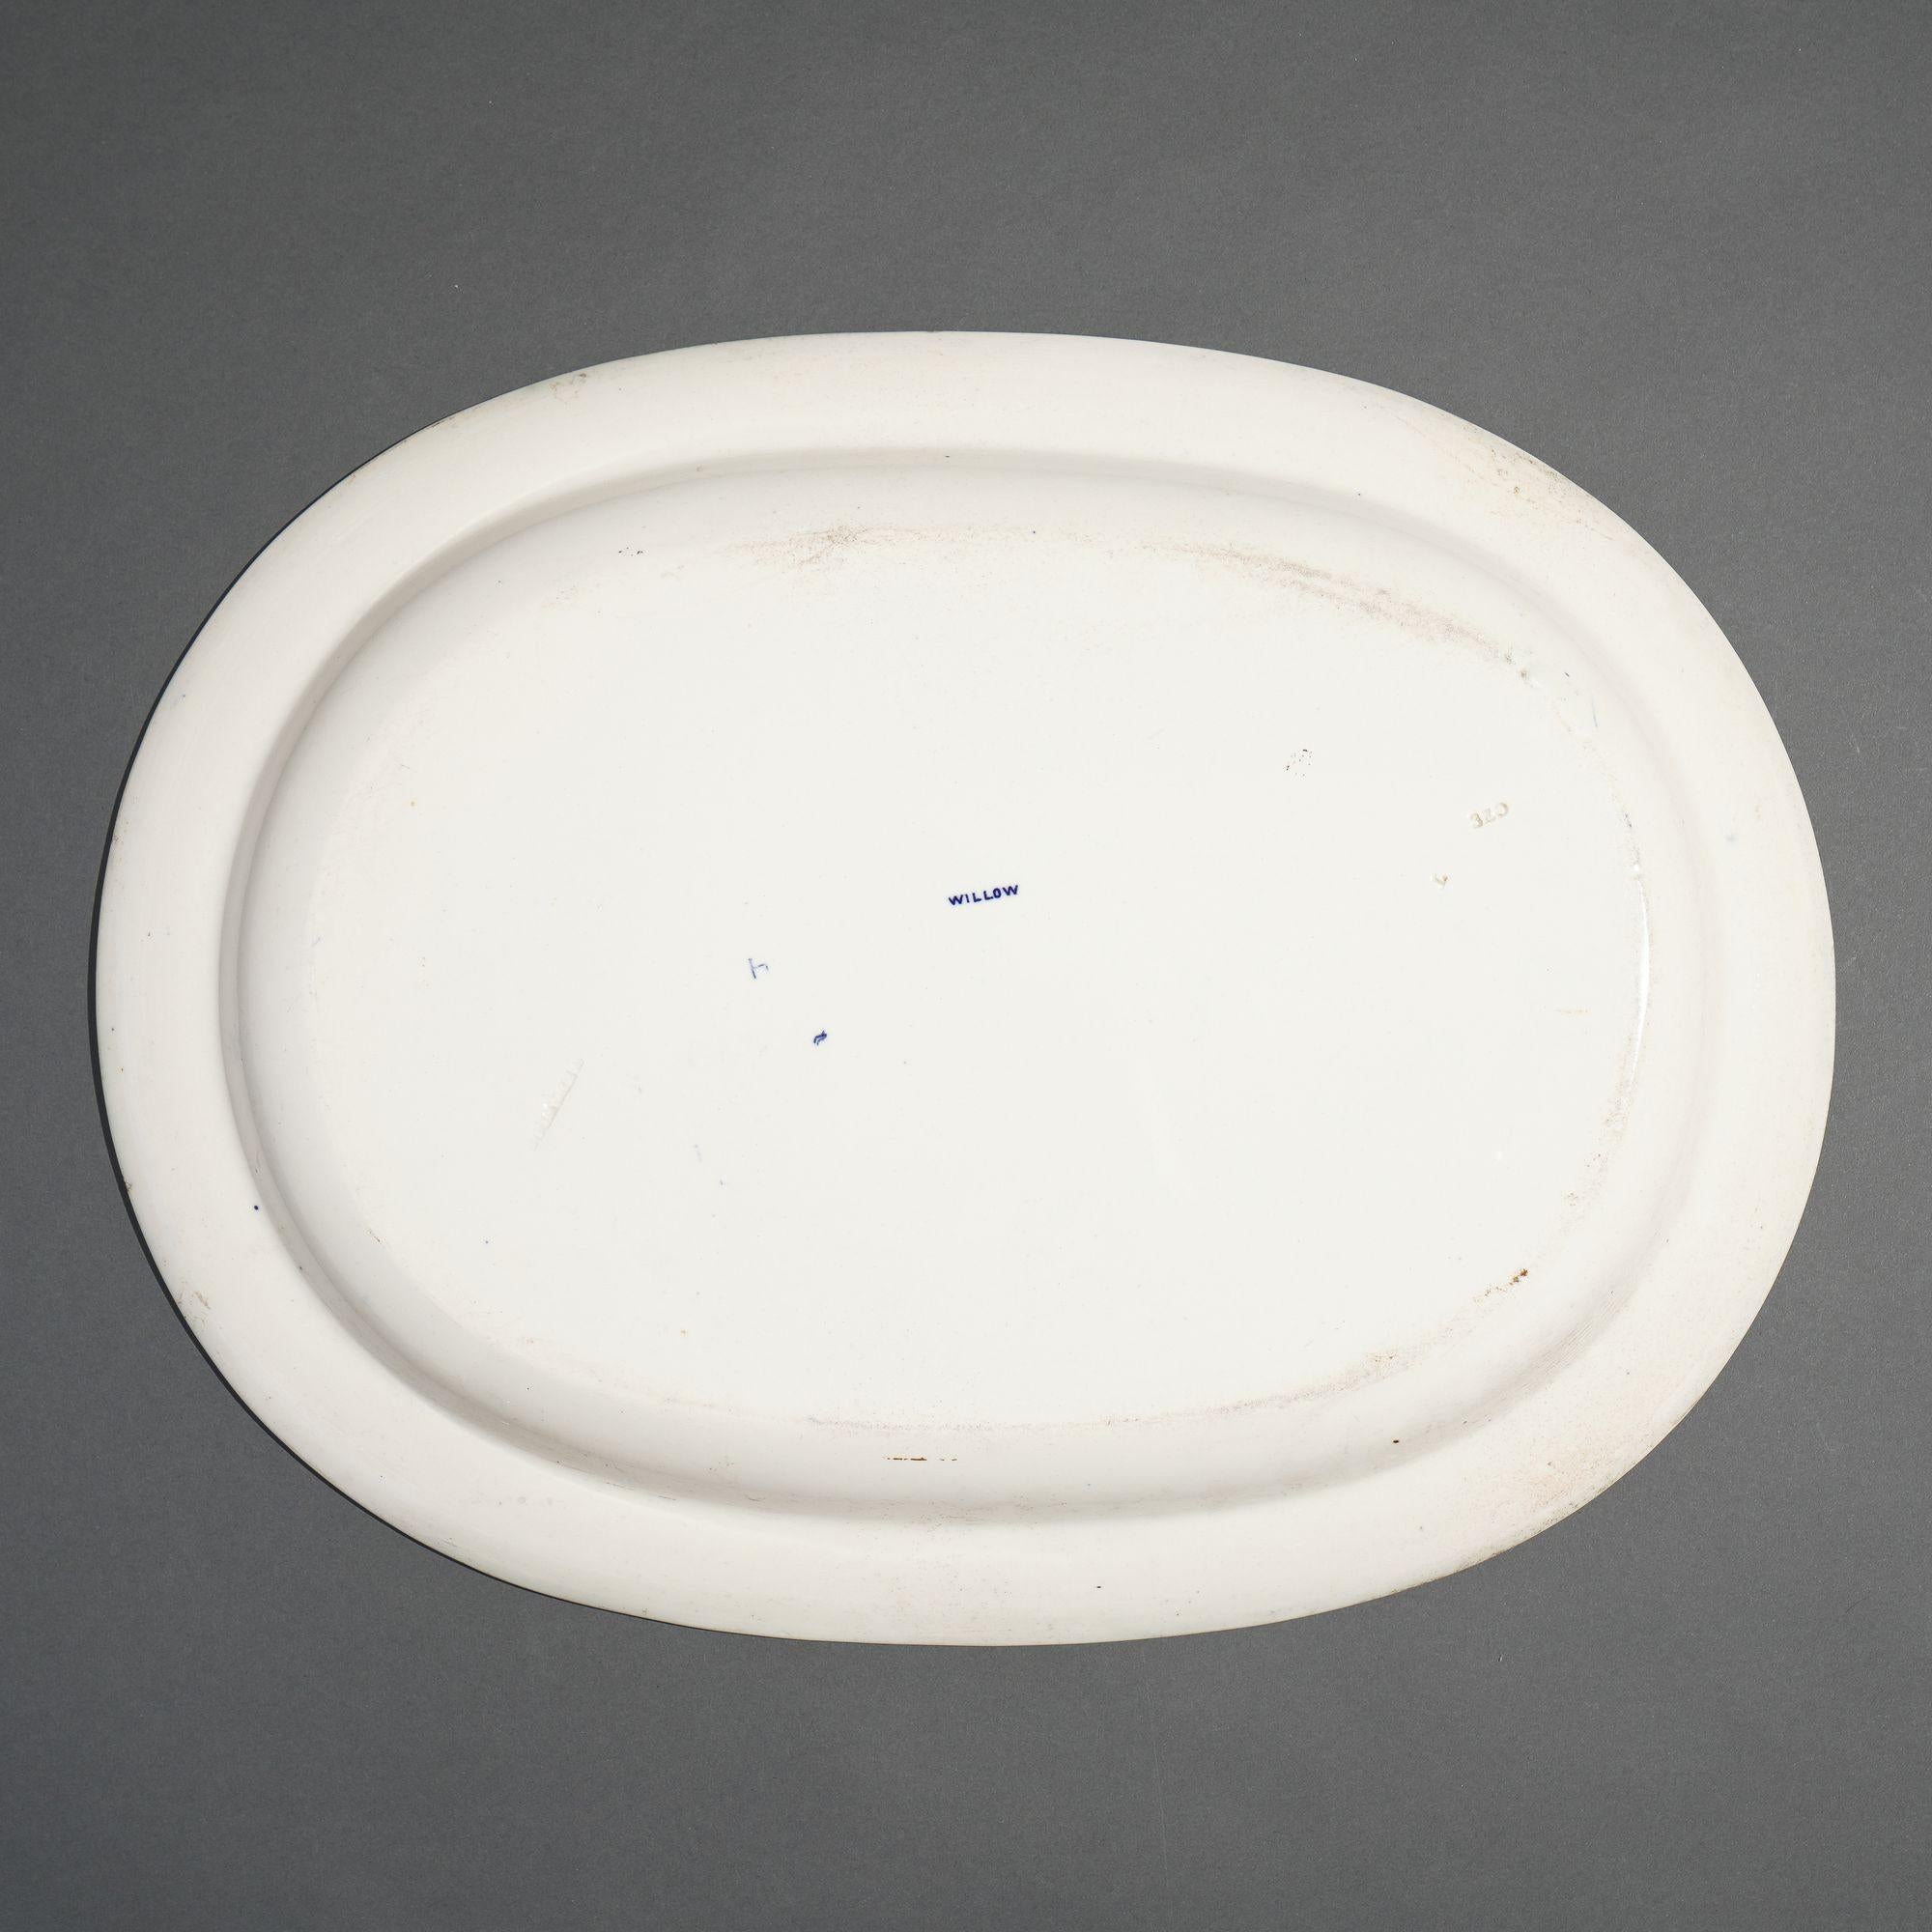 Ceramic Willow pattern oval platter by Wedgwood, 1891-92 For Sale